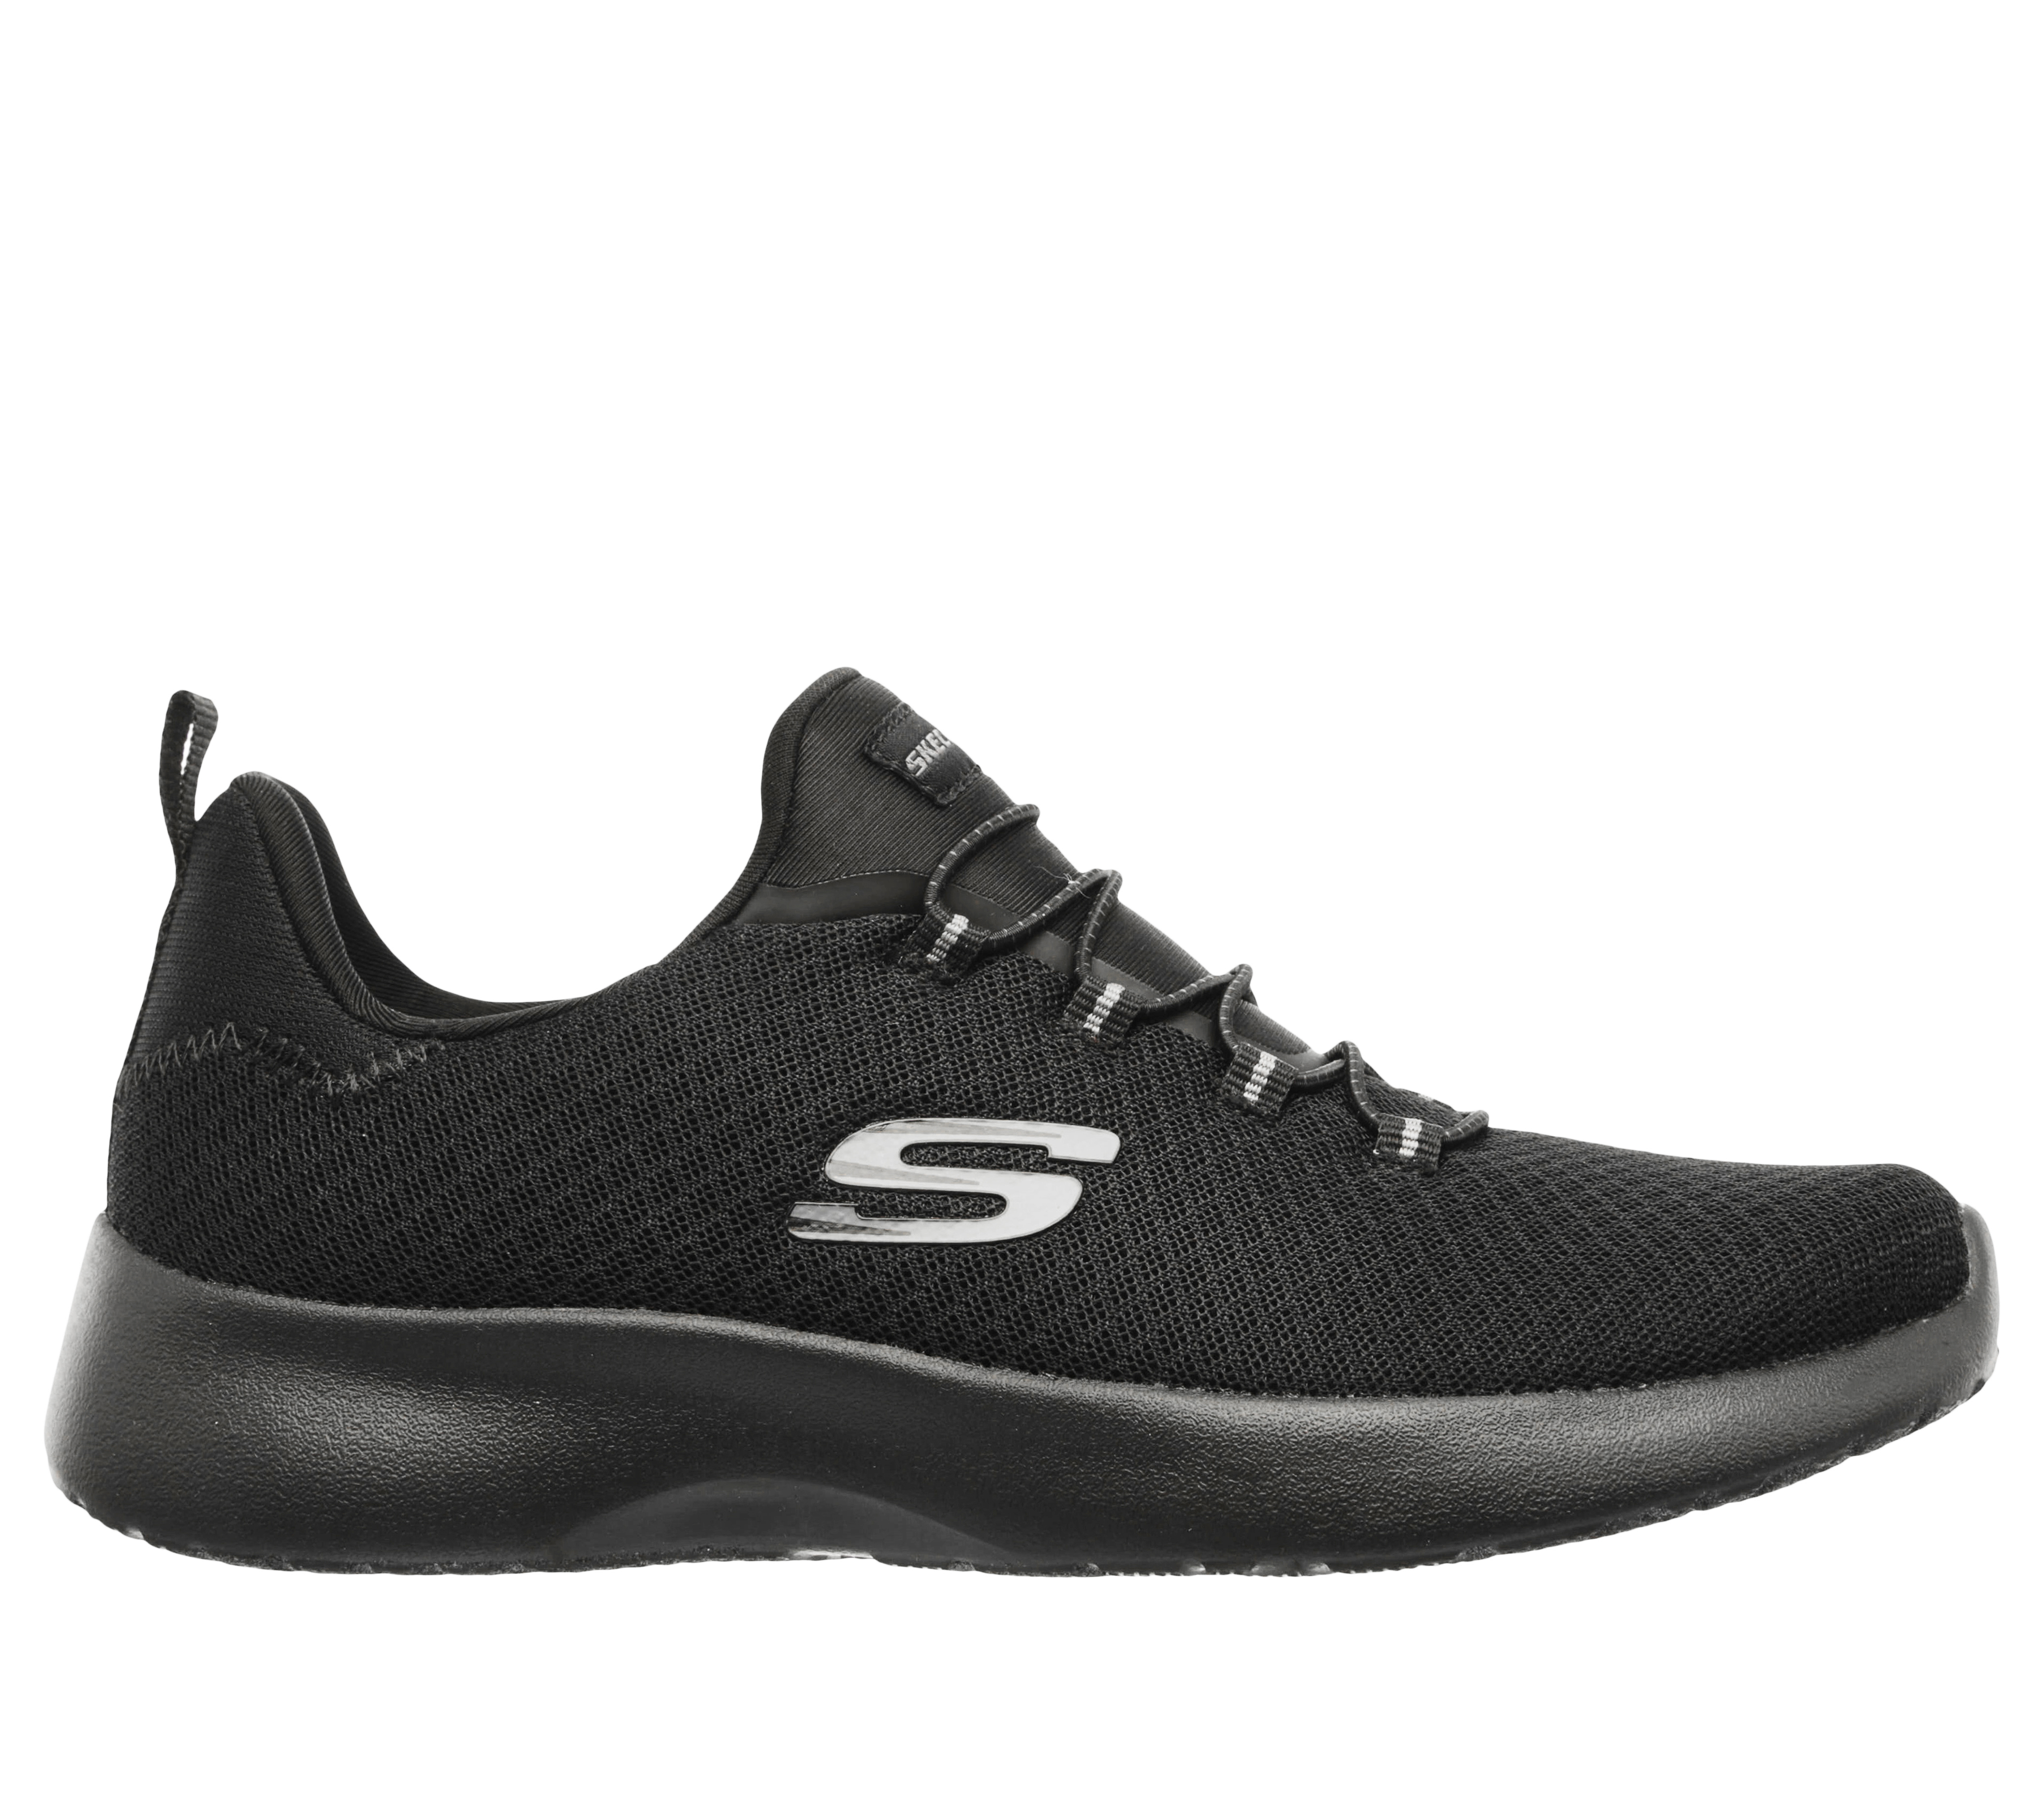 skechers dynamight review